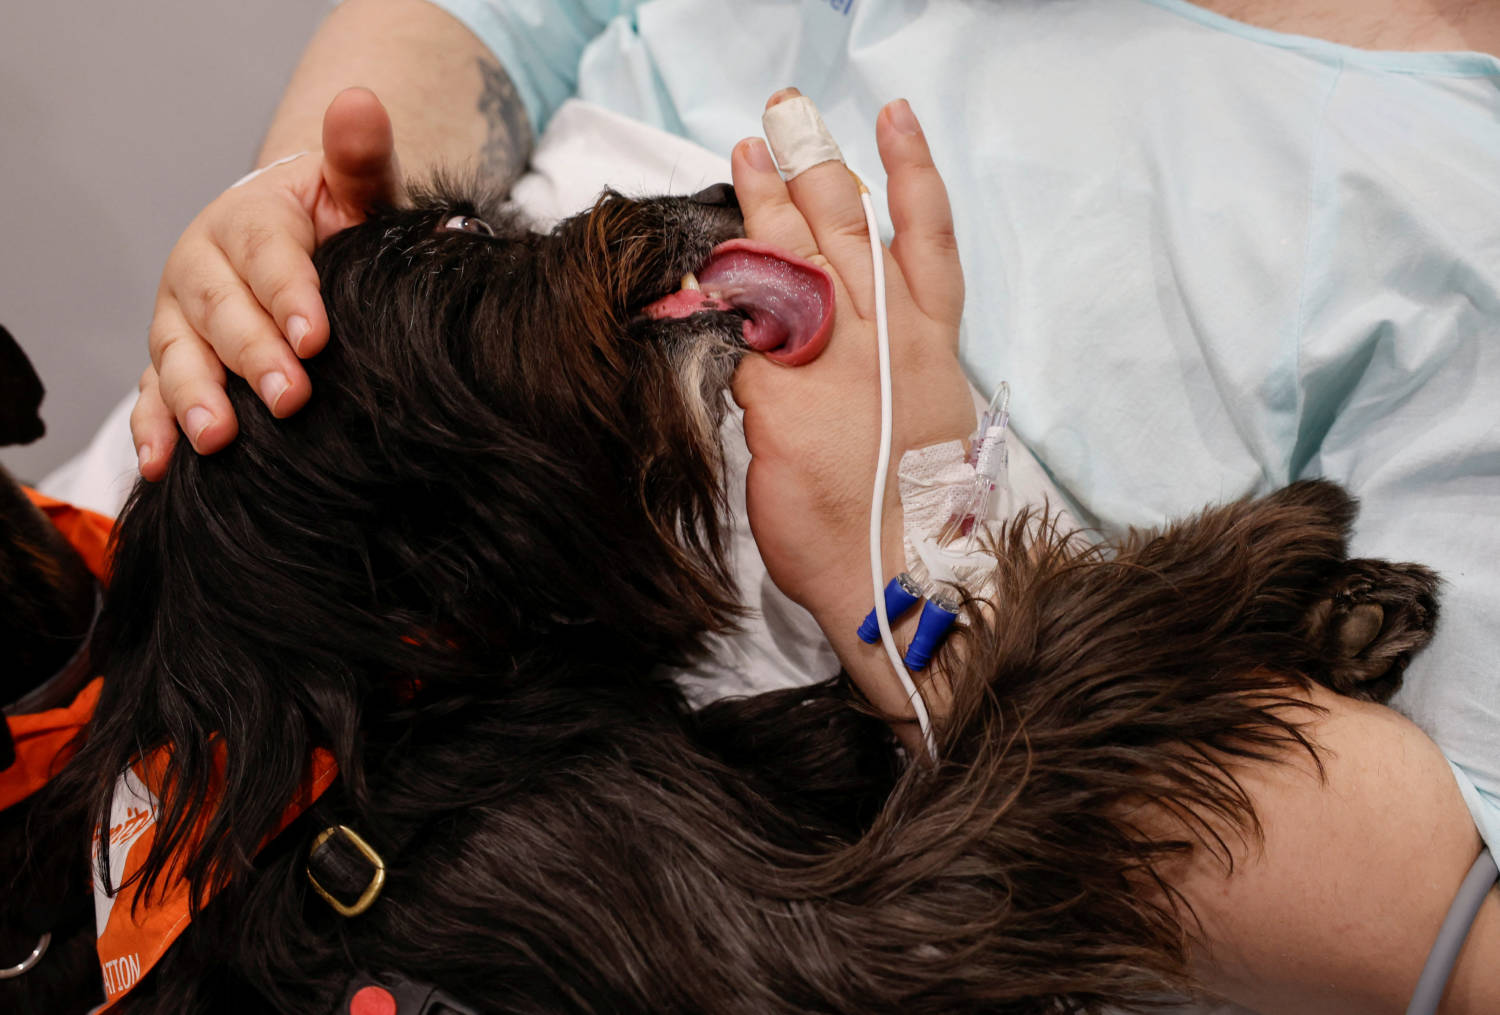 Theraphy Dogs Bring Relief And Comfort To Icu Patients At Hospital Del Mar In Barcelona